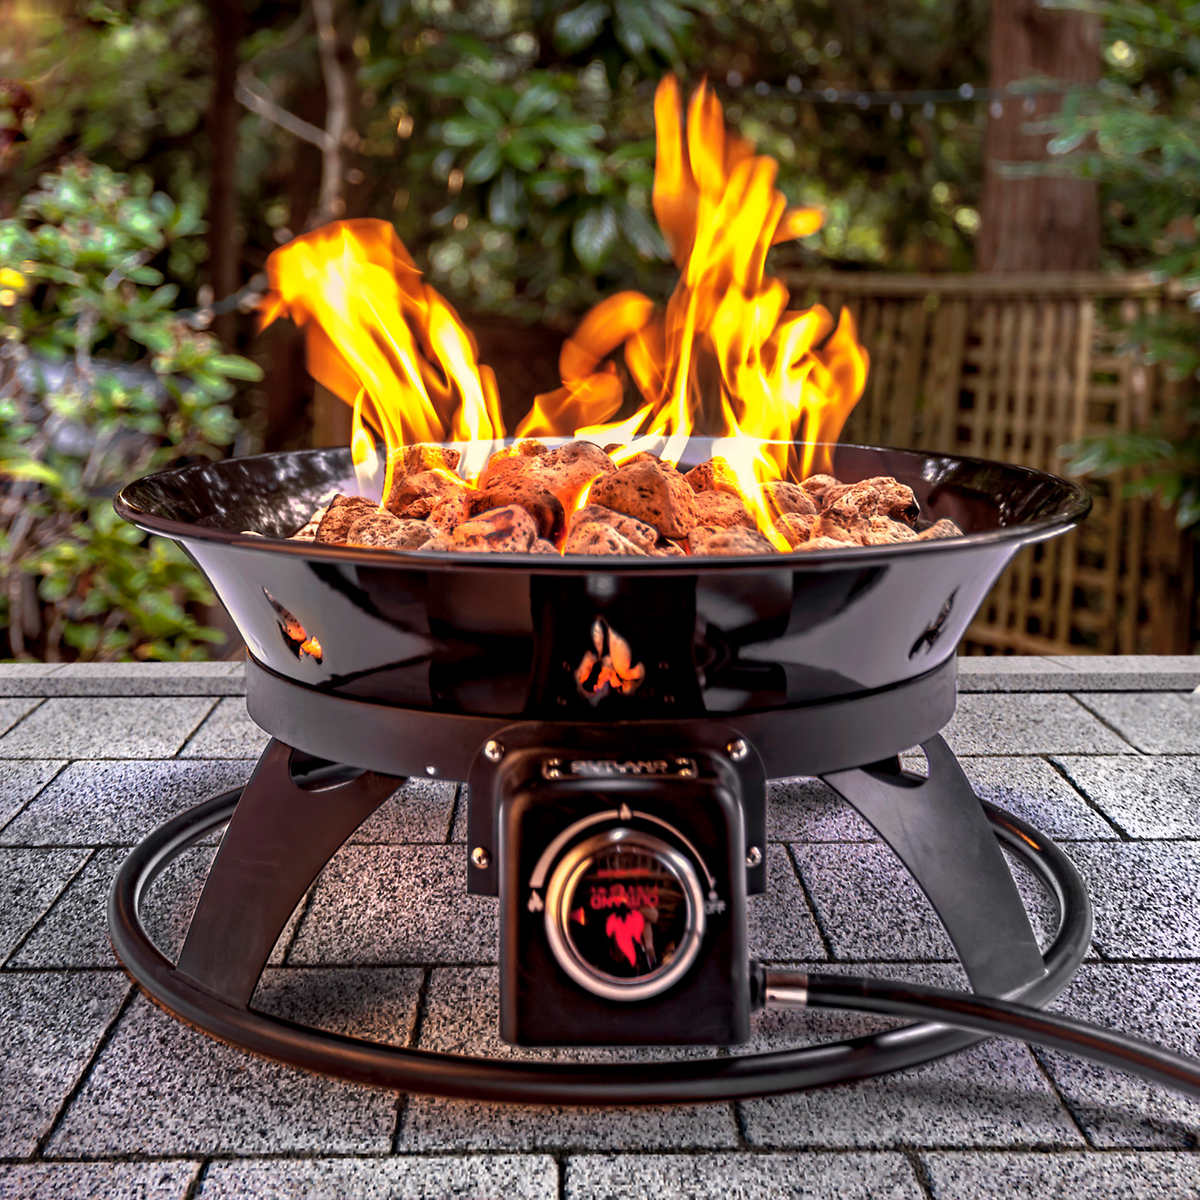 Outland Firebowl Outdoor Firepit Costco